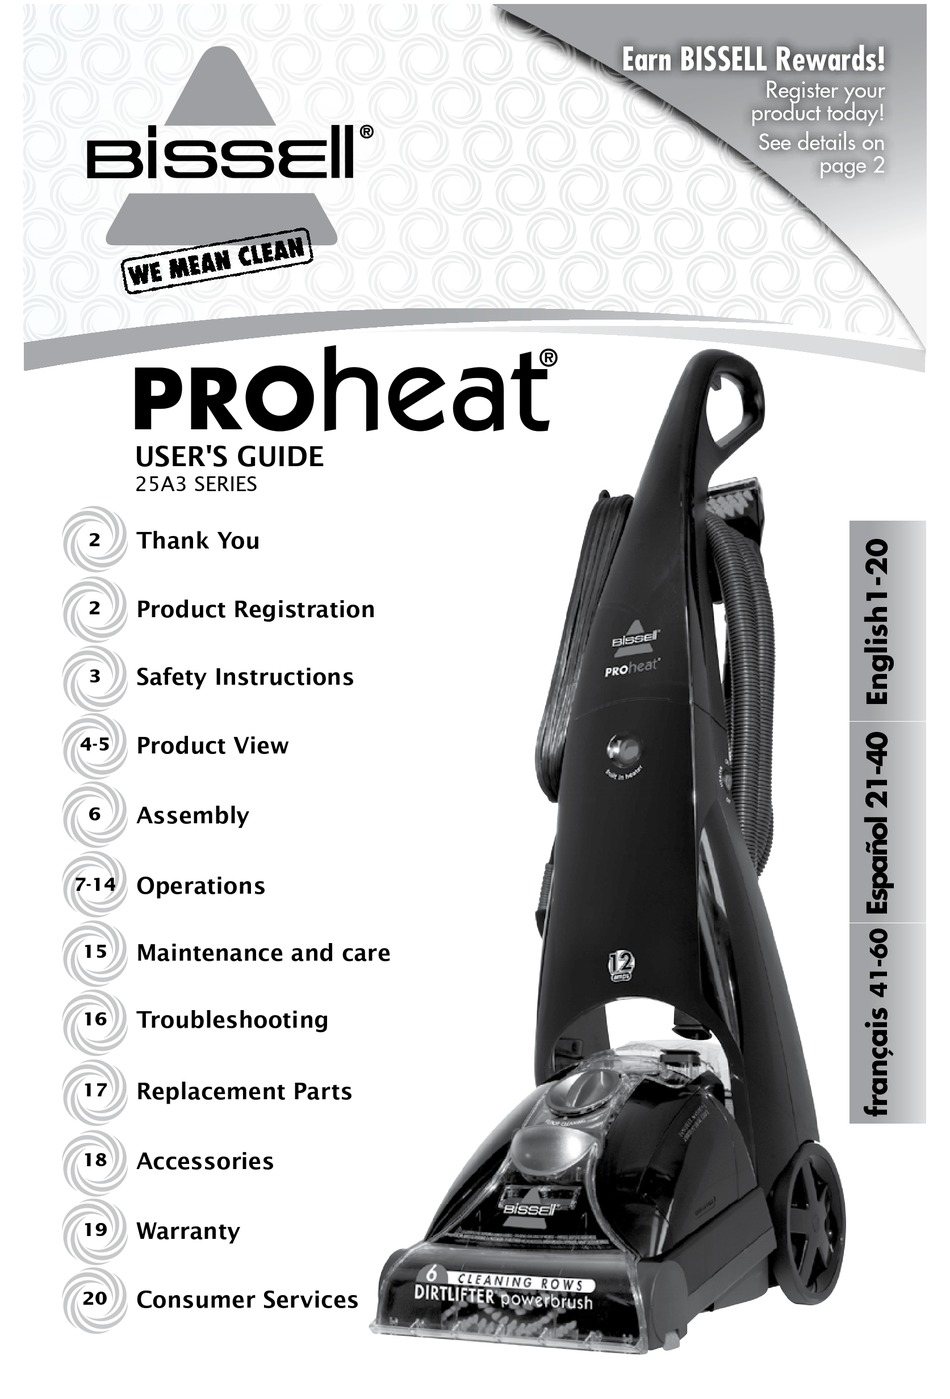 Bissell Proheat Essential Manual